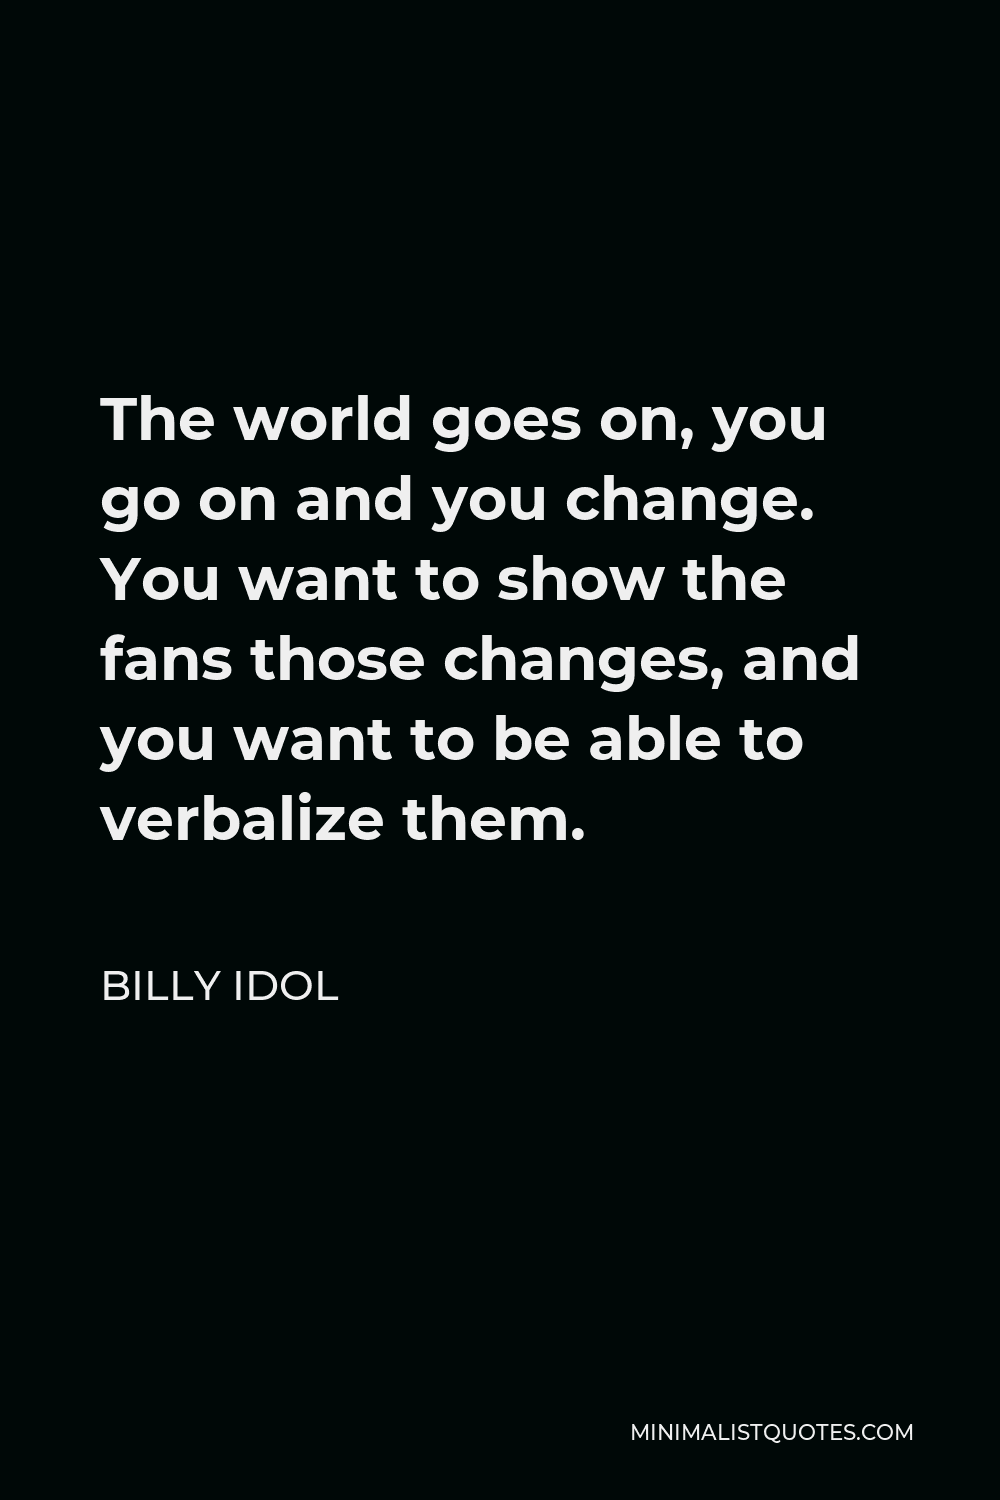 Billy Idol Quote - The world goes on, you go on and you change. You want to show the fans those changes, and you want to be able to verbalize them.